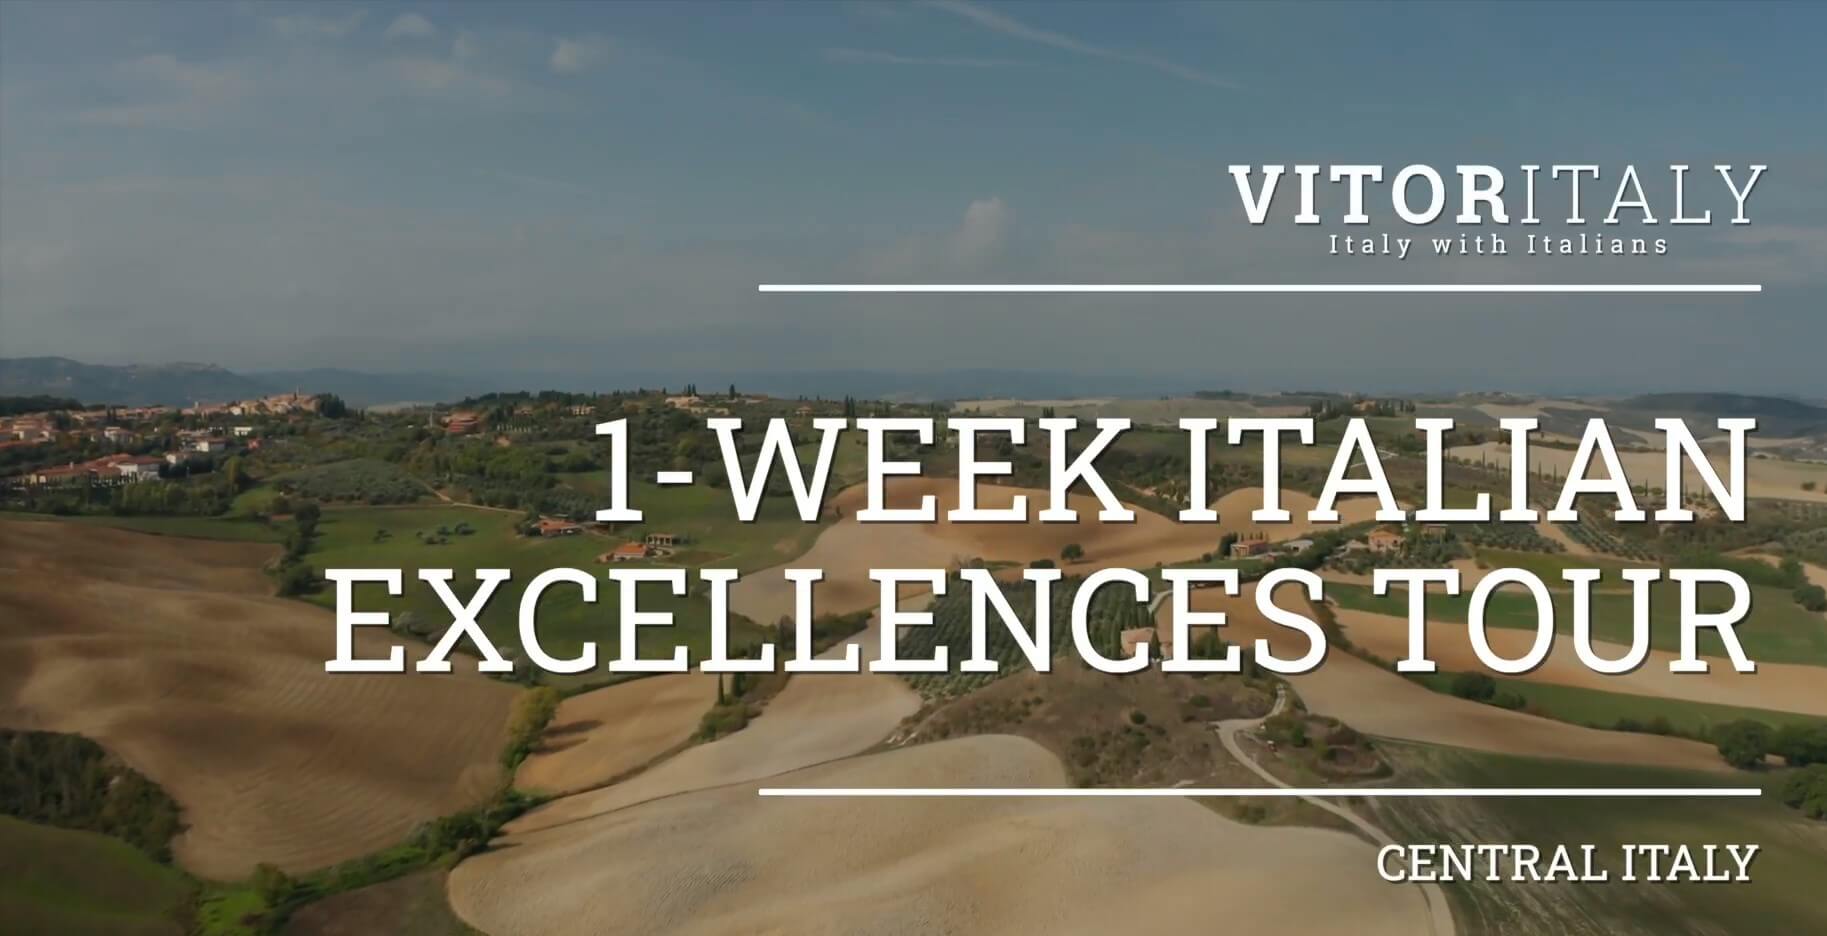 1-WEEK ITALIAN EXCELLENCES PRIVATE TOUR - CENTRAL ITALY